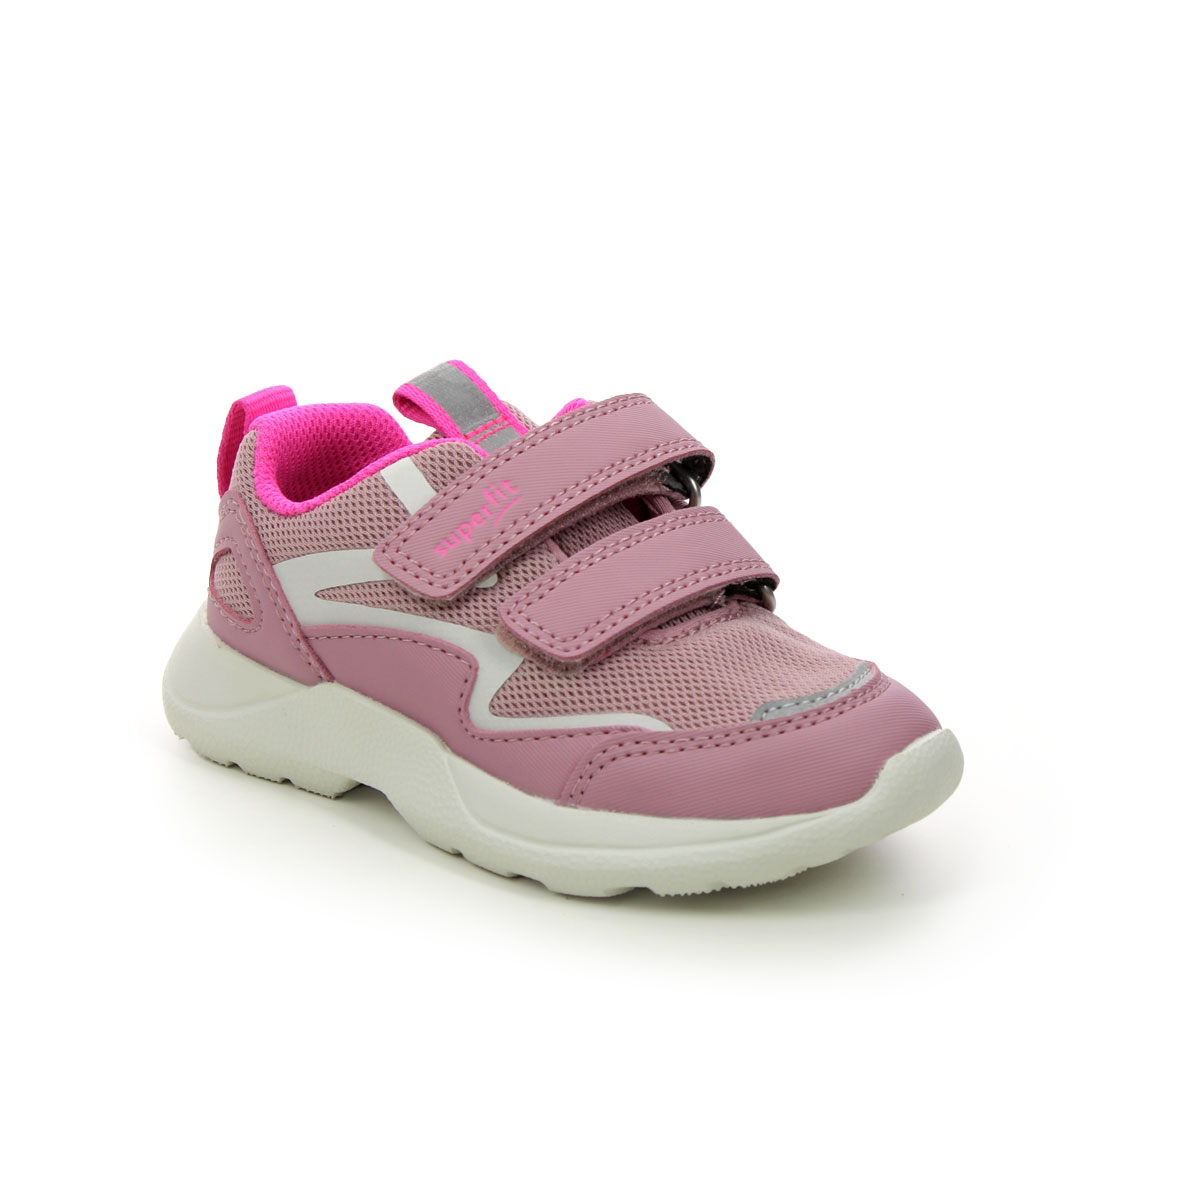 Superfit Rush Mini Pink Kids Girls Trainers 1006206-5510 In Size 25 In Plain Pink For kids